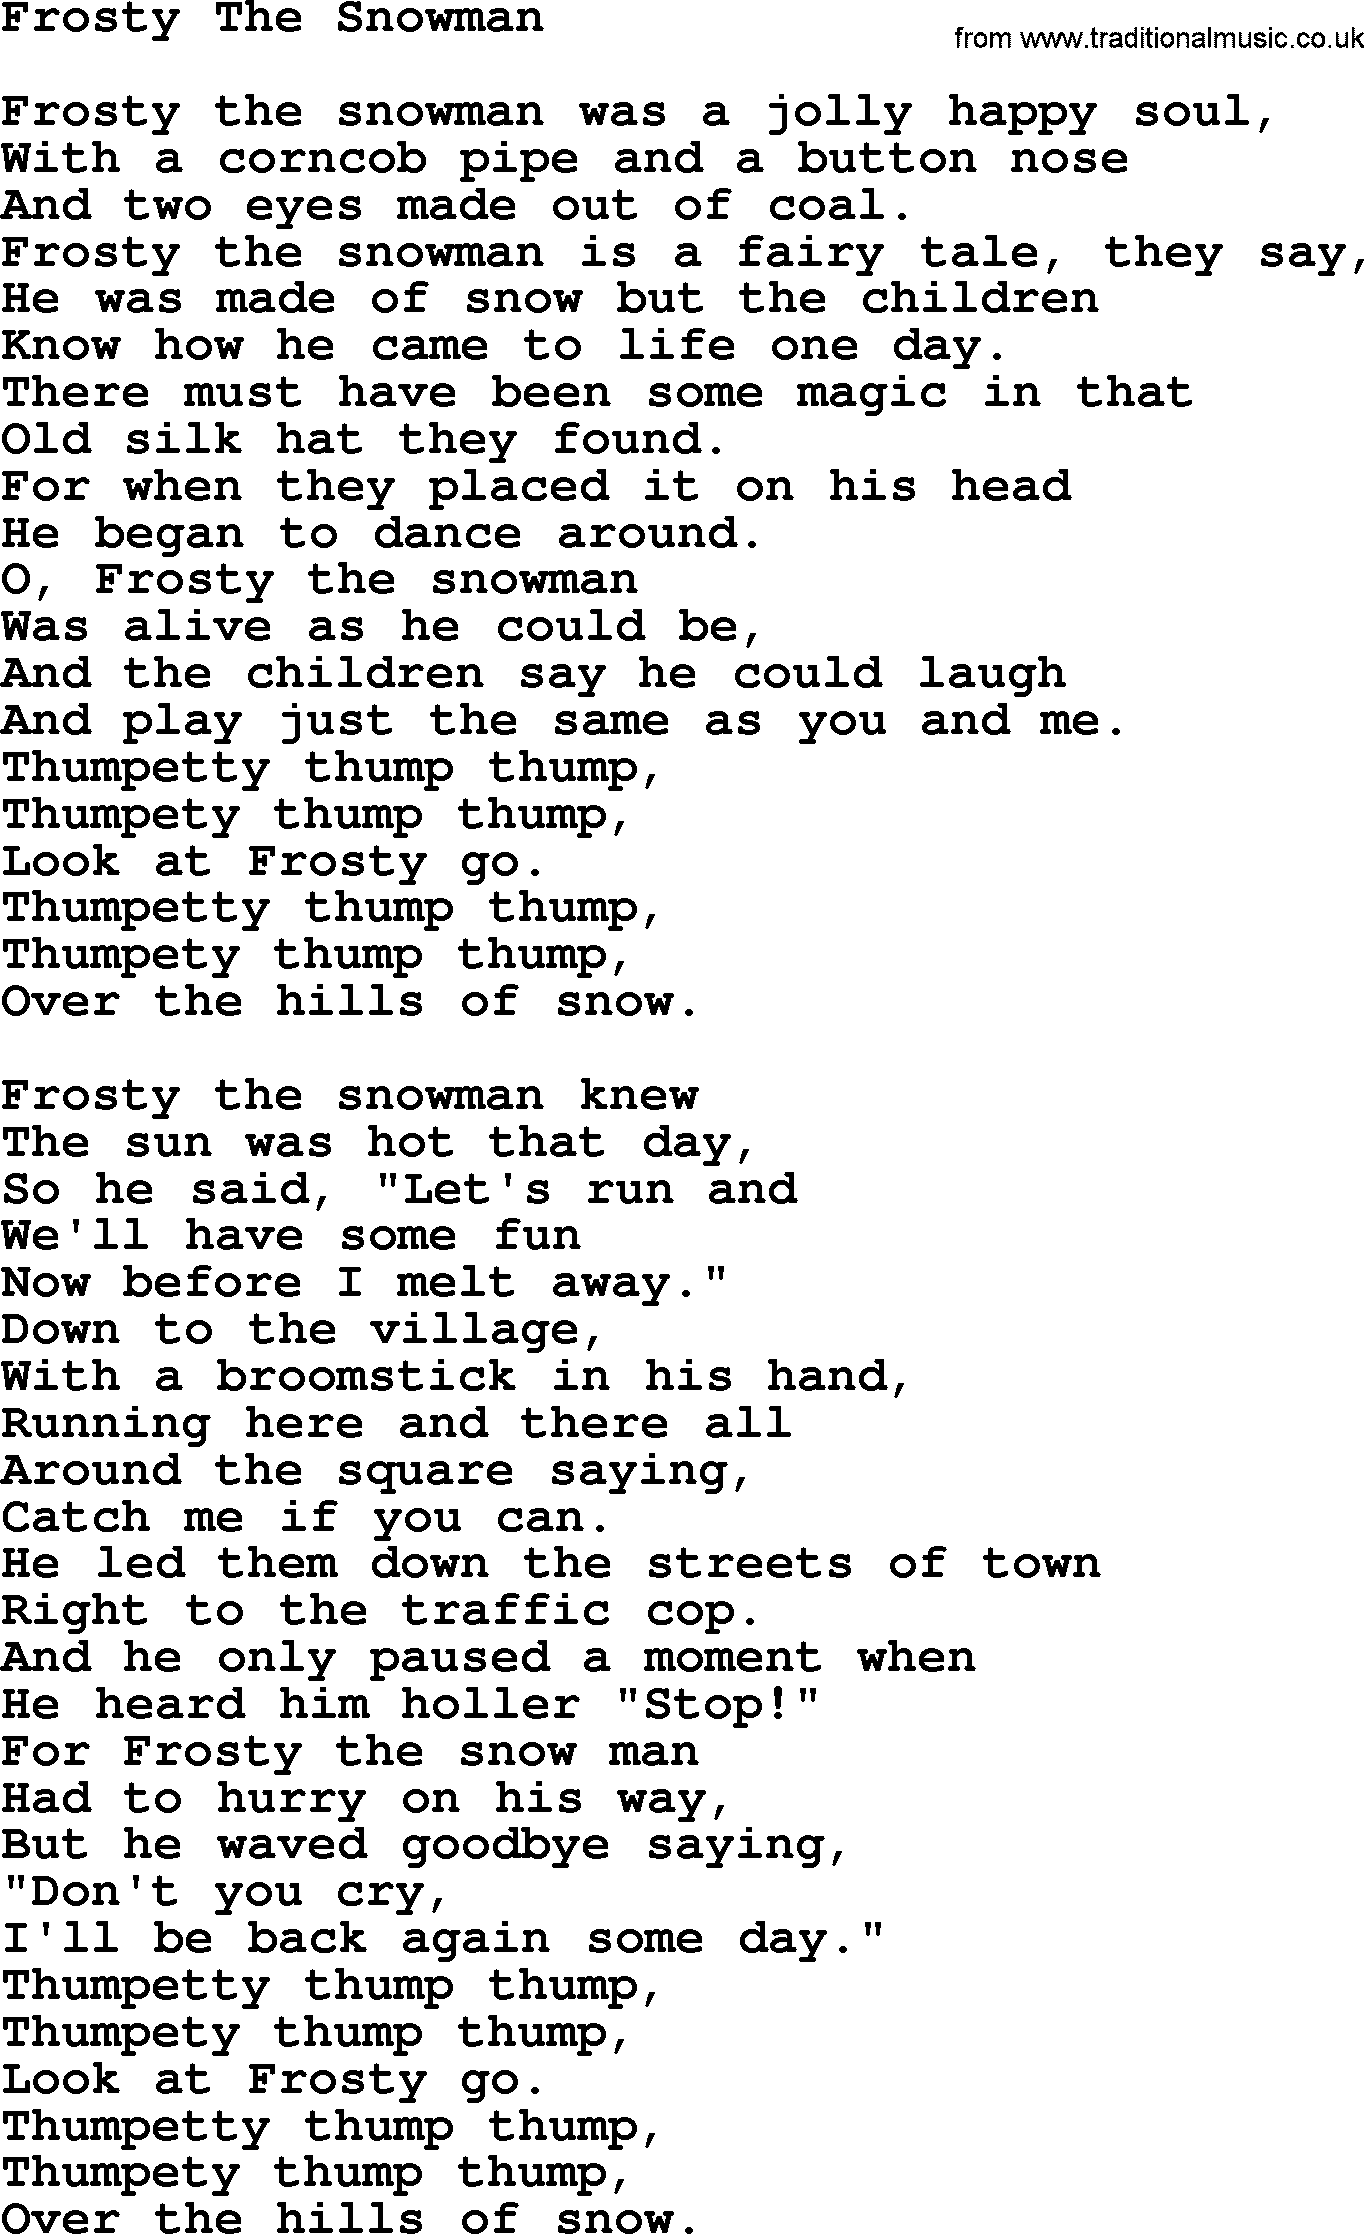 Willie Nelson song Frosty The Snowman, lyrics